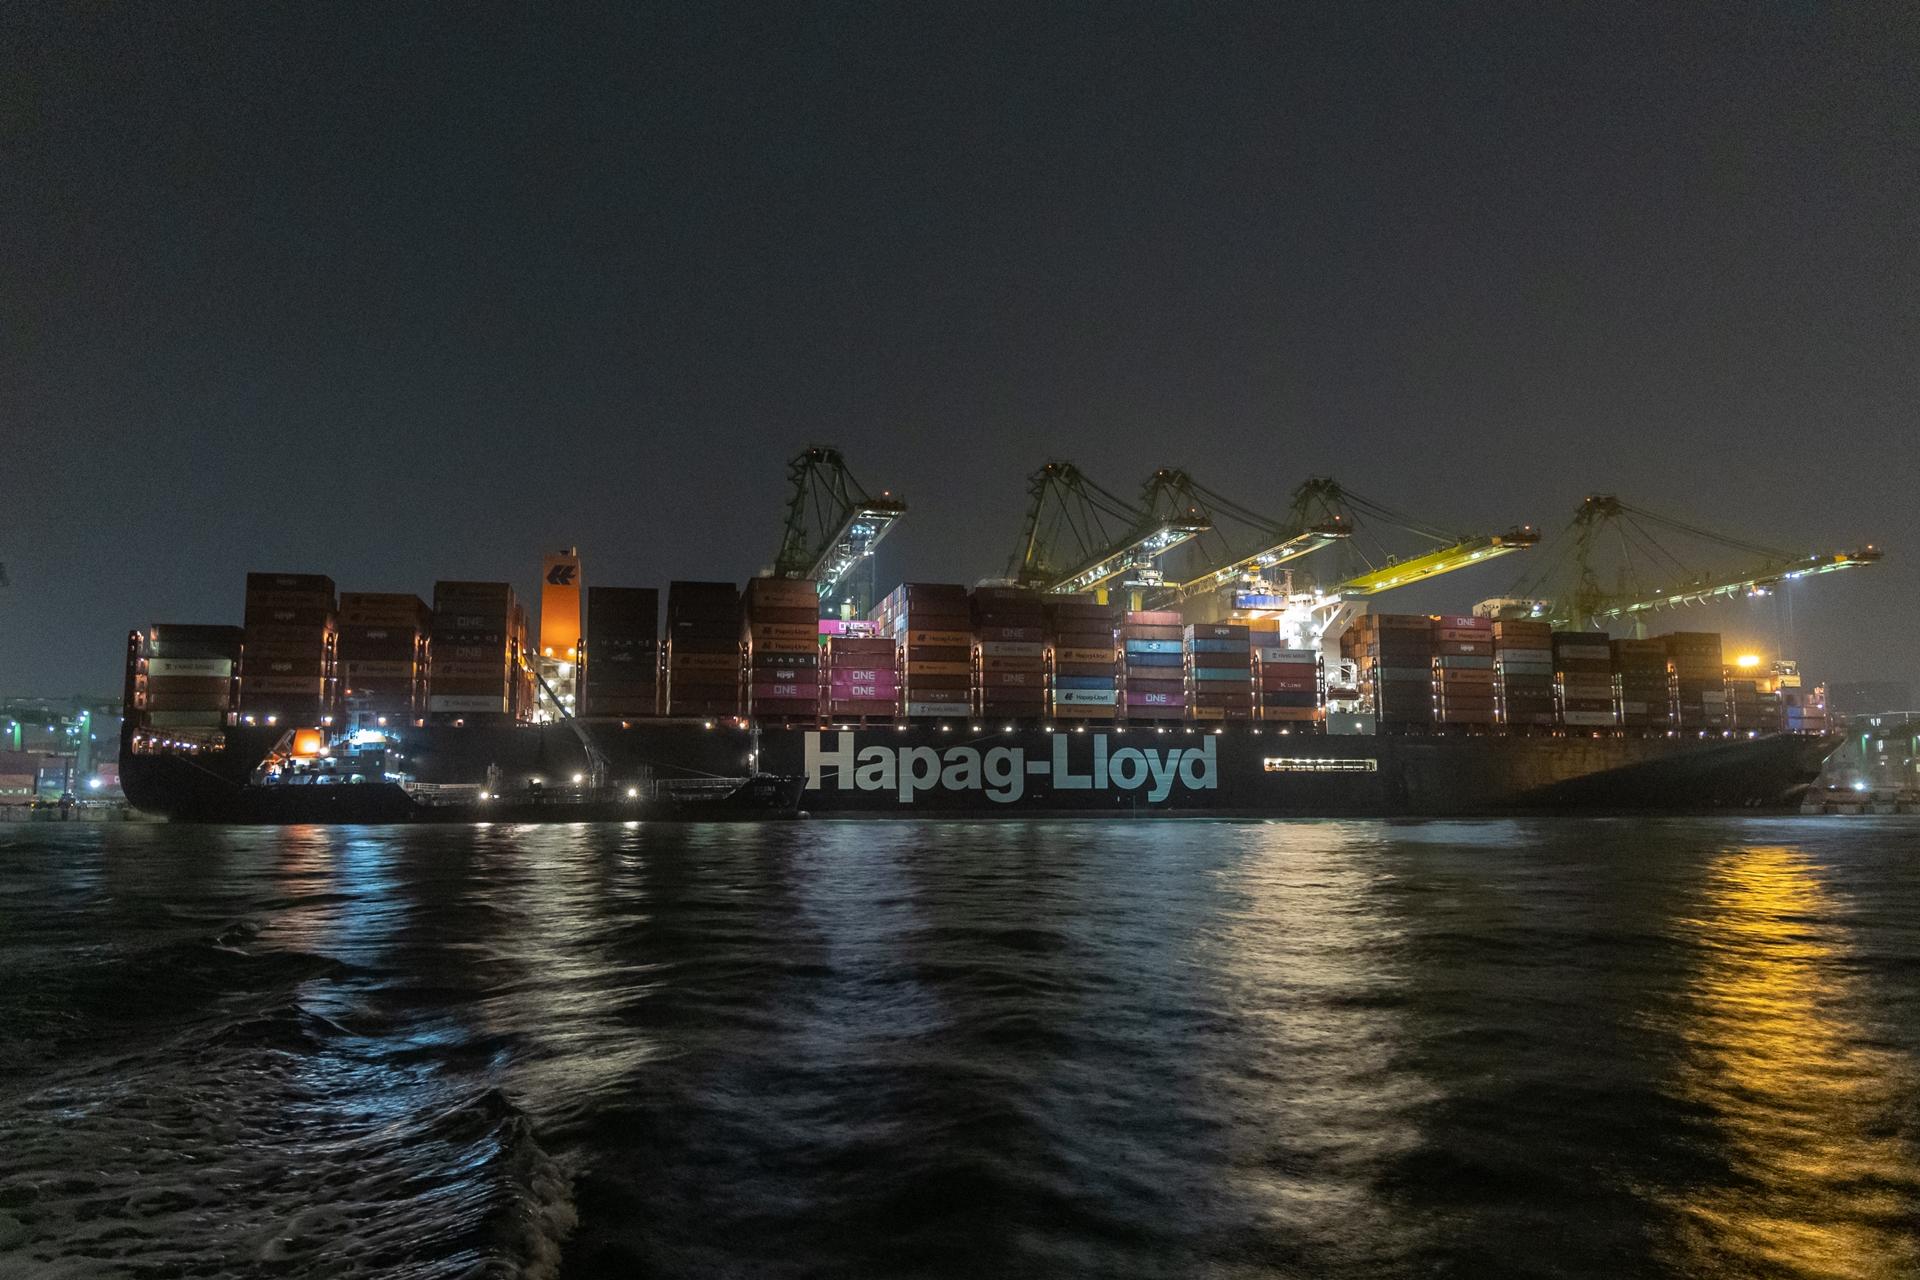 TotalEnergies Marine Fuels kick-started its first biofuel bunker term delivery for Hapag Lloyd in Singapore, with the refuelling of the Afif container ship with 2,000 MT of B24 biofuel on 20th January, 2023.